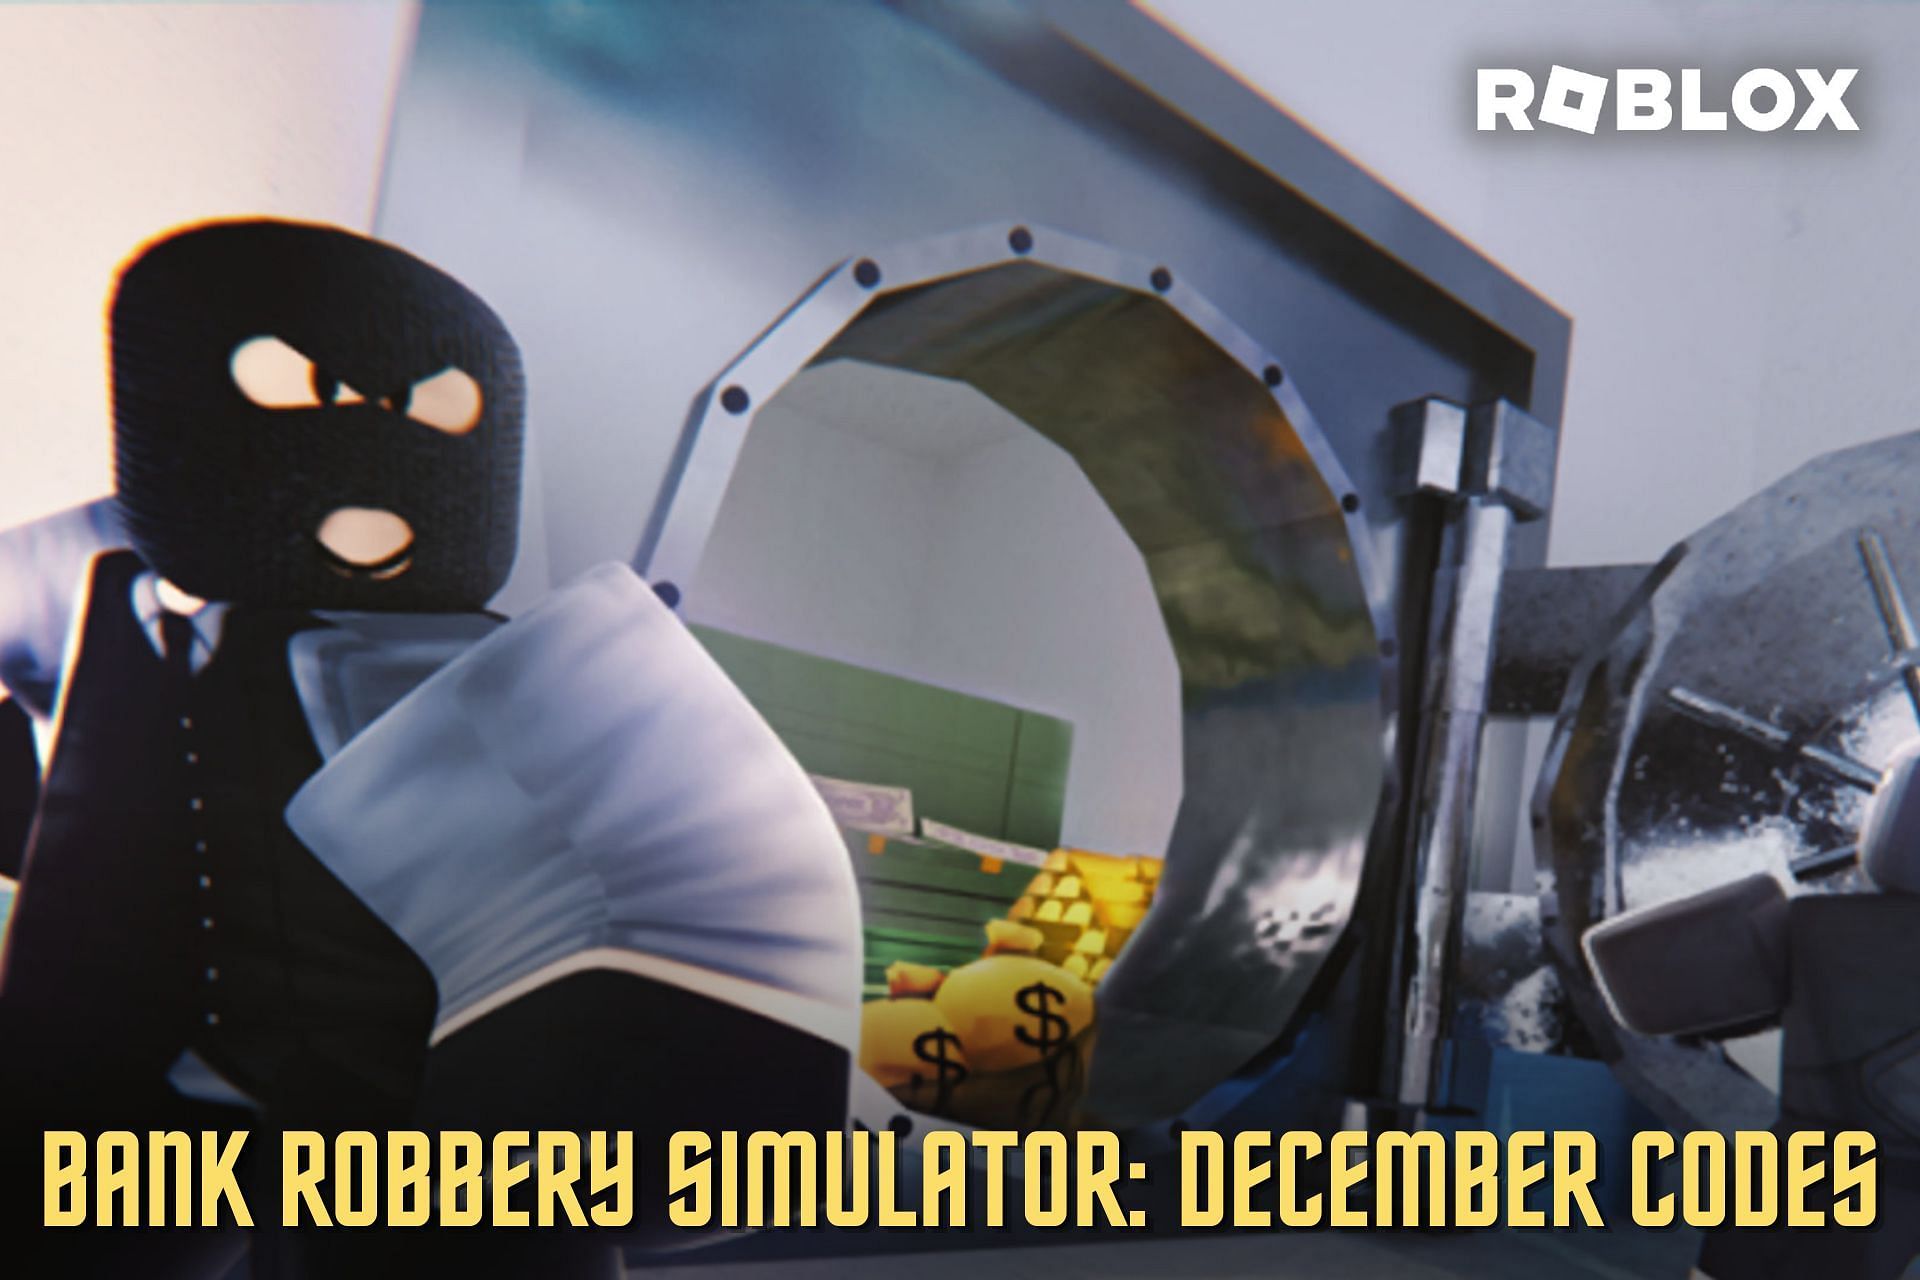 Roblox Bank Robbery Simulator Codes For December 2022 Free Coins And Diamonds